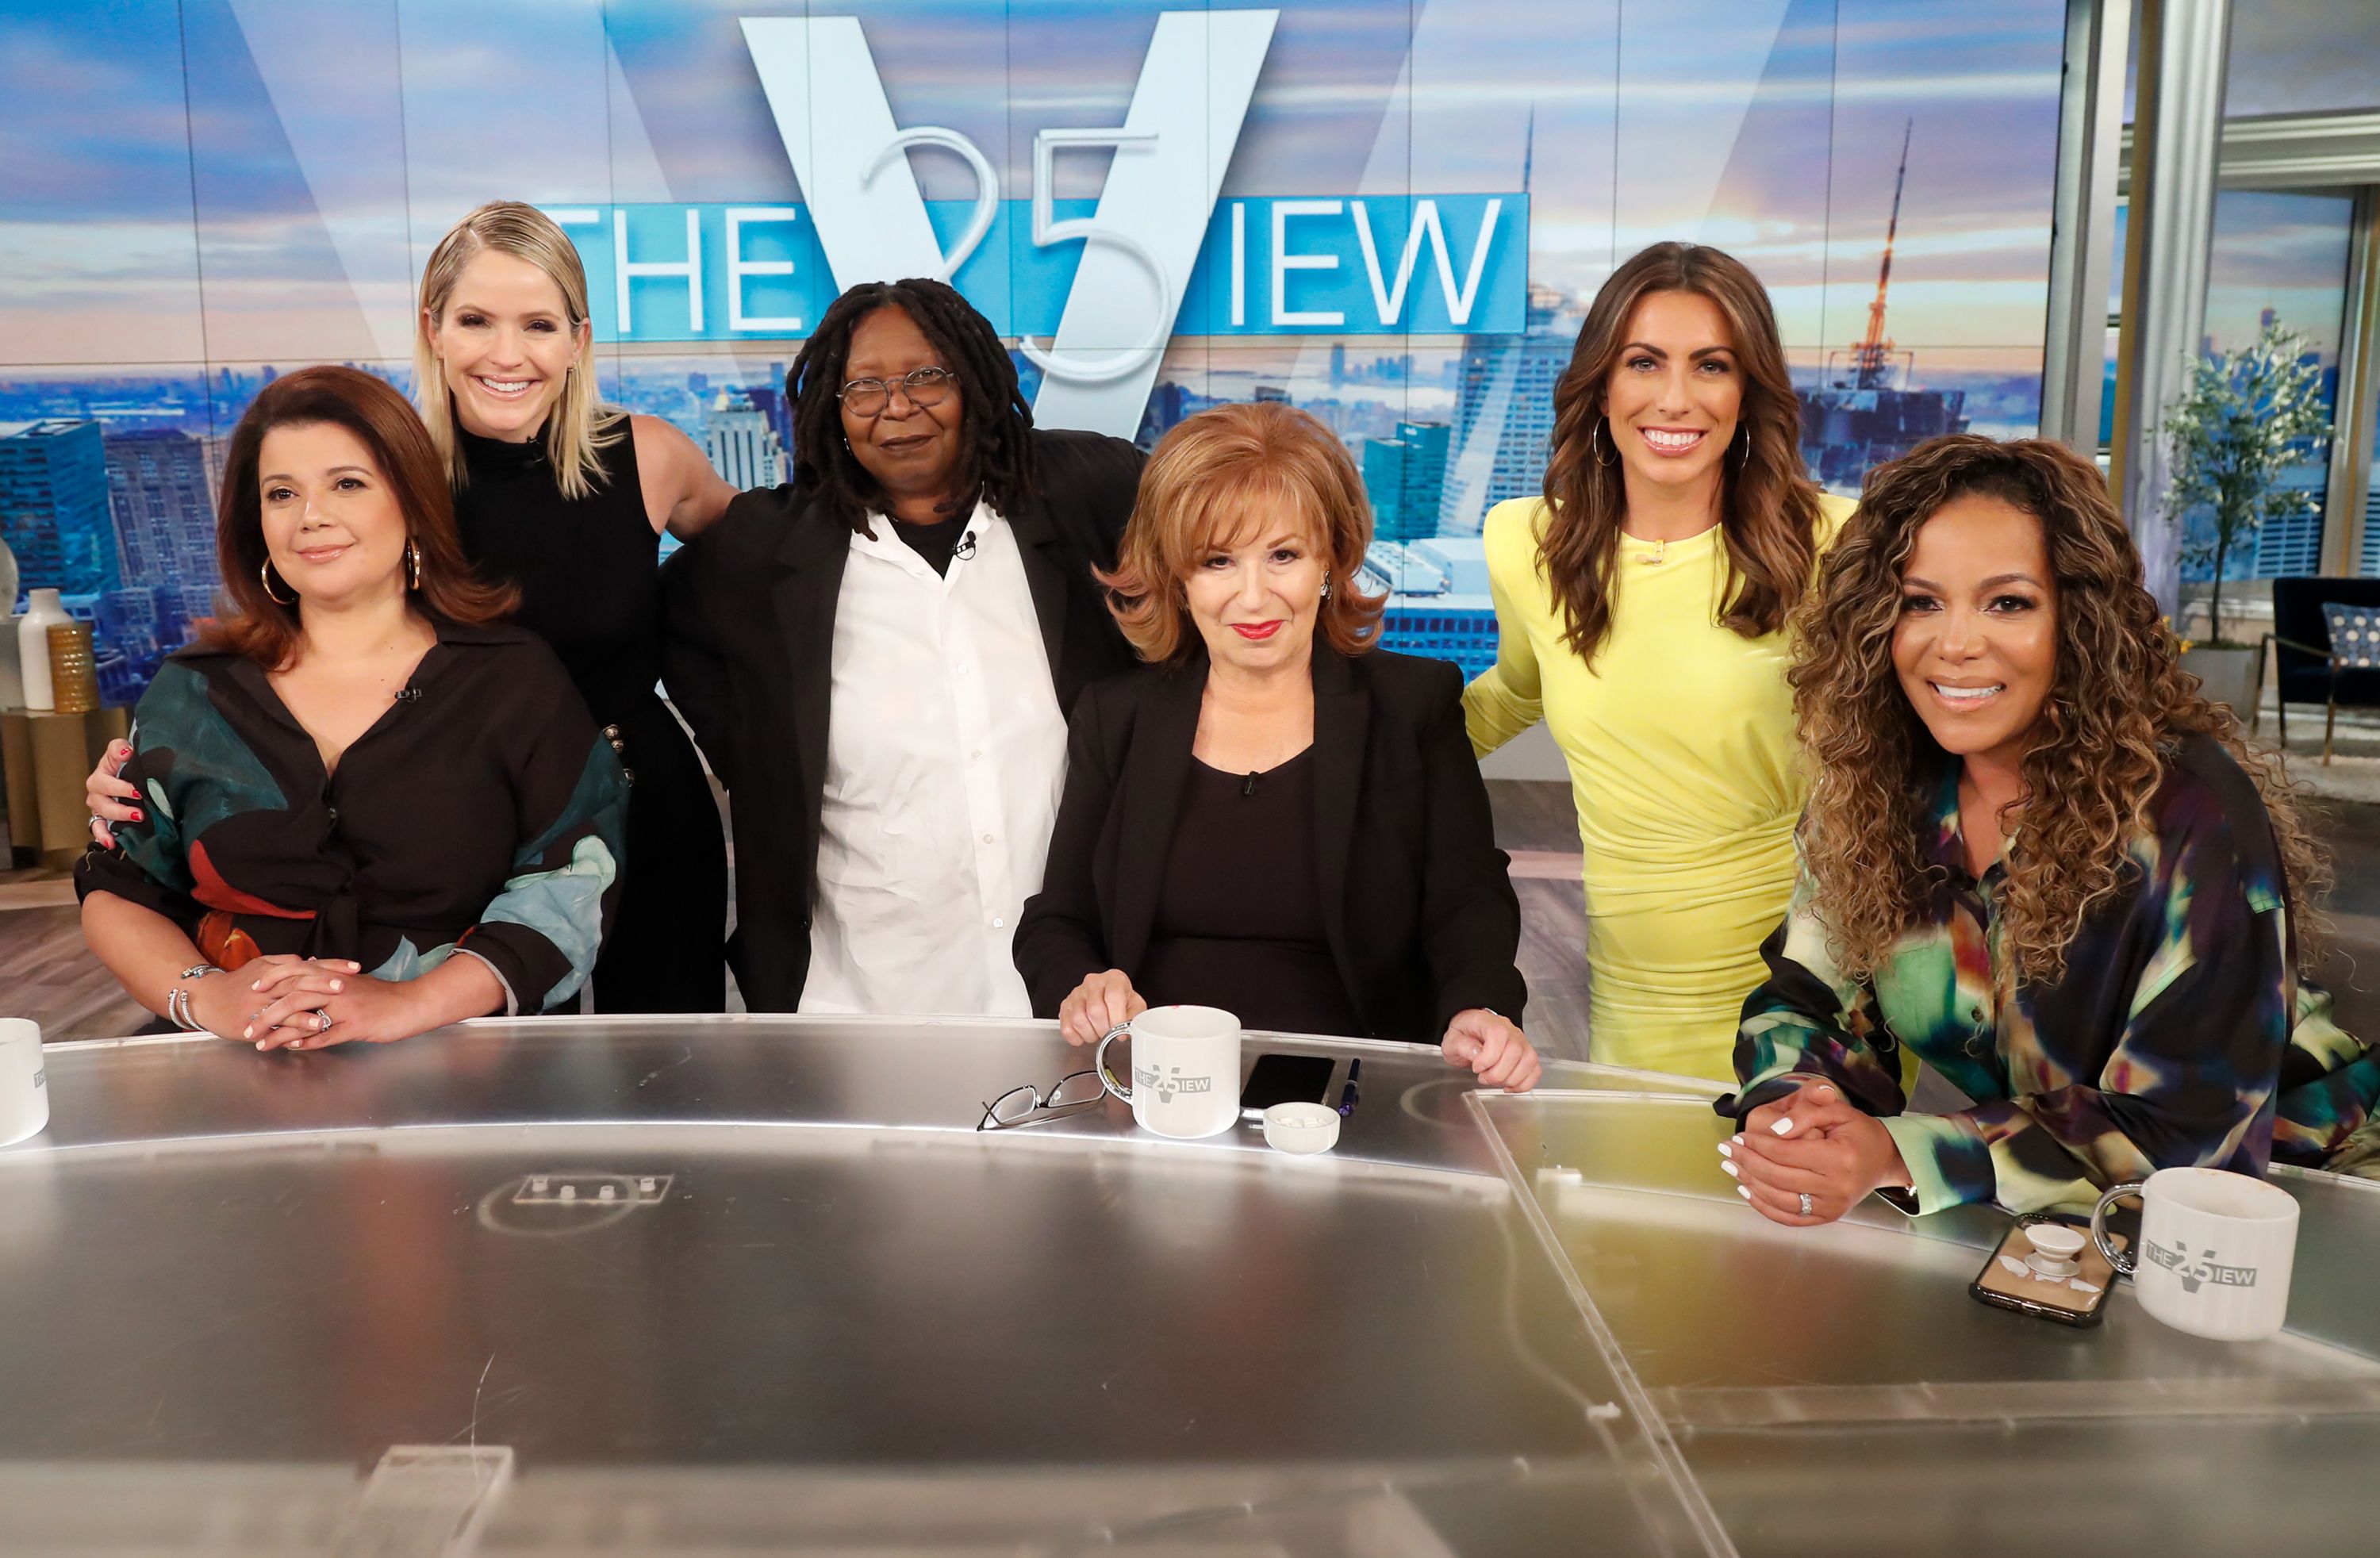 10 Little-Known Facts About “The View”